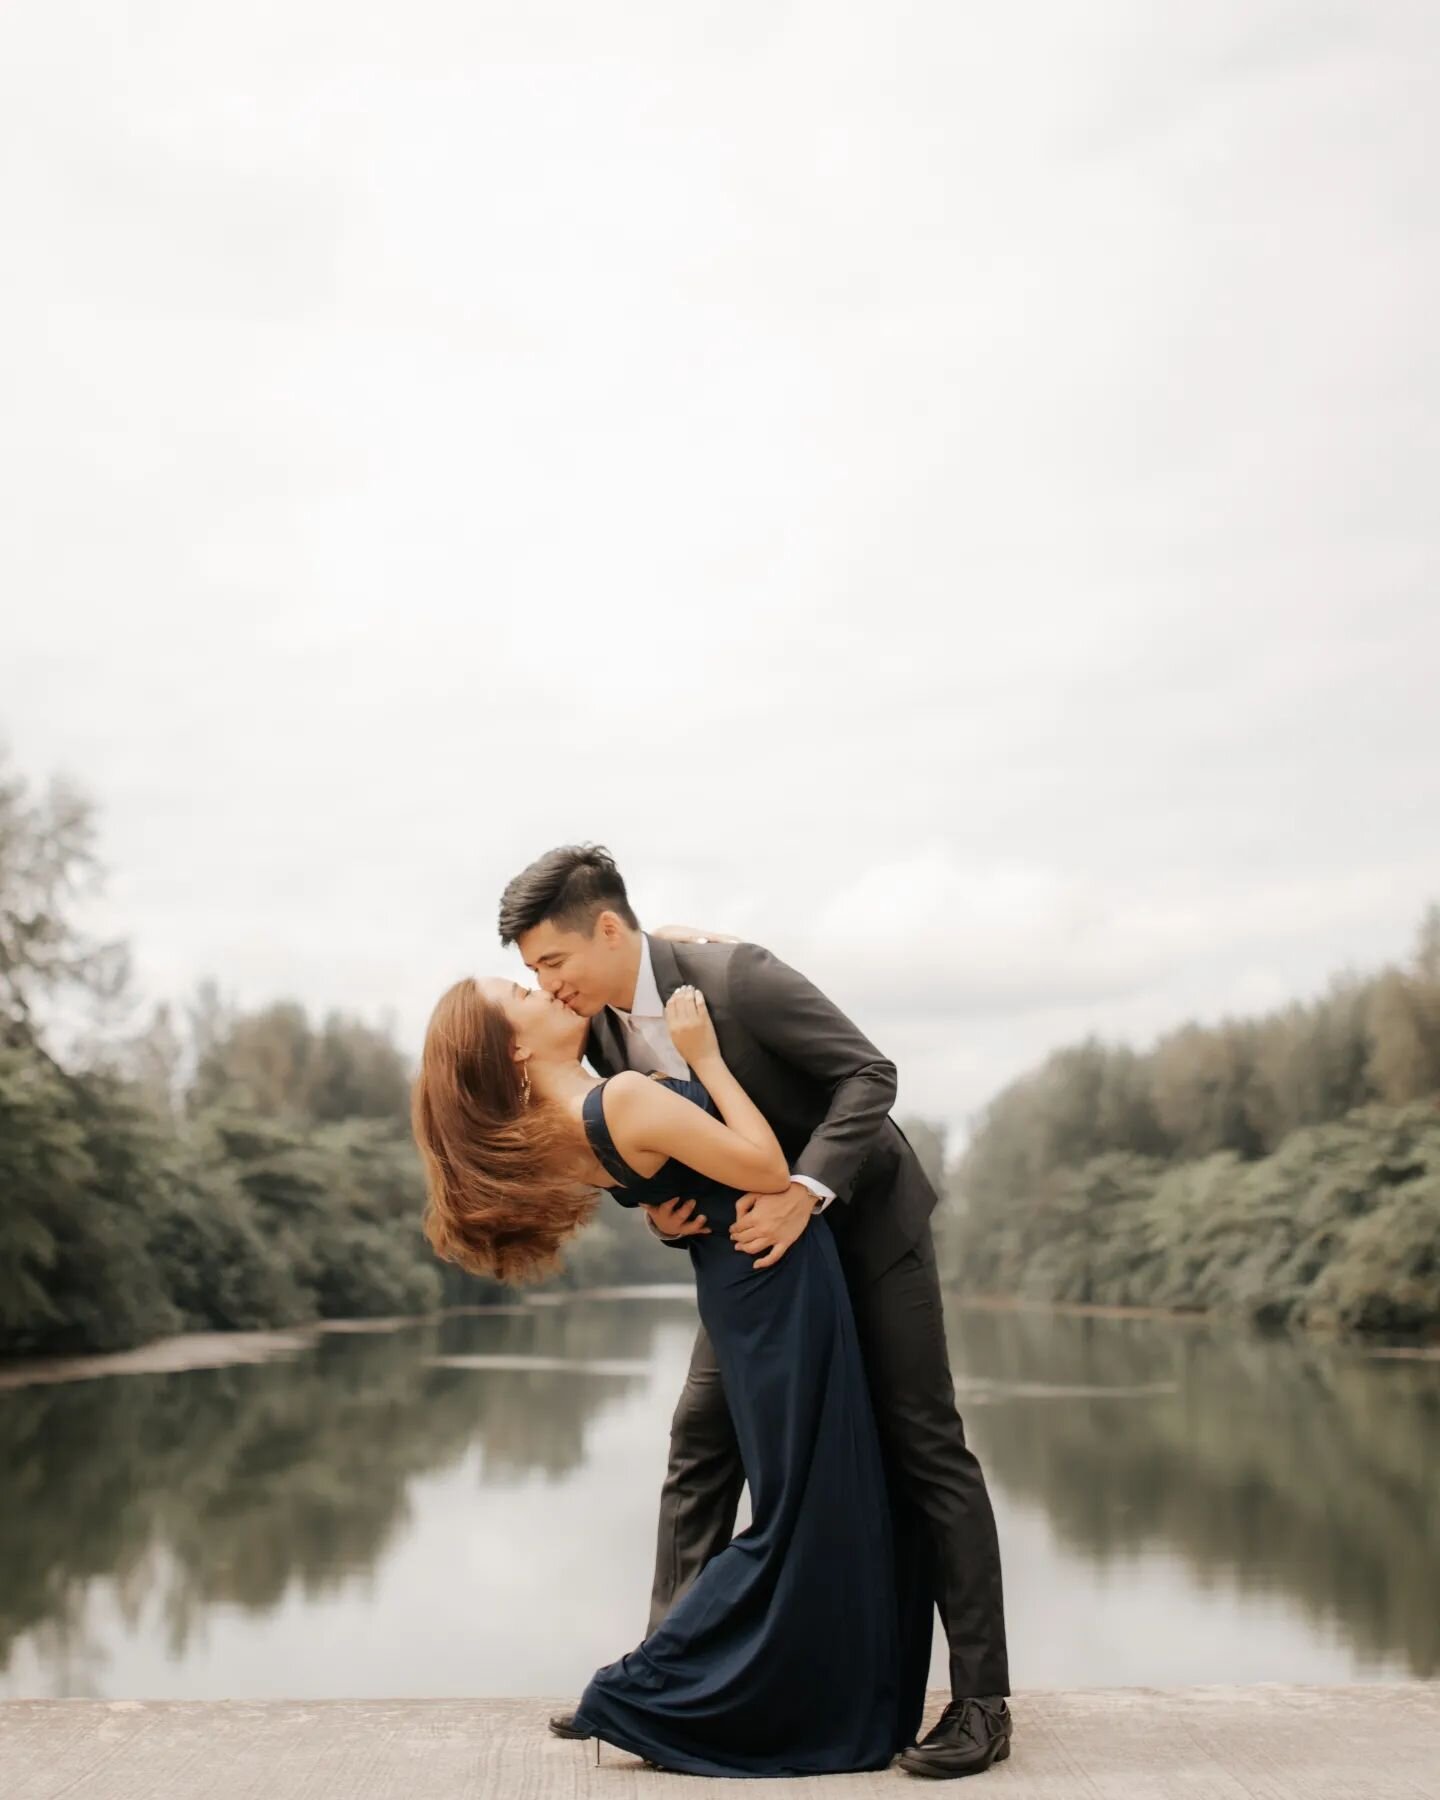 E + D | Love, for these 2, emerged from their passion in dance. Their bond bloomed into an everlasting romance and it was such a memorable day capturing the love these 2 has to offer.
📷: @ash_breadandbutterworks 
&bull;
&bull;
&bull;
&bull;
&bull;
#